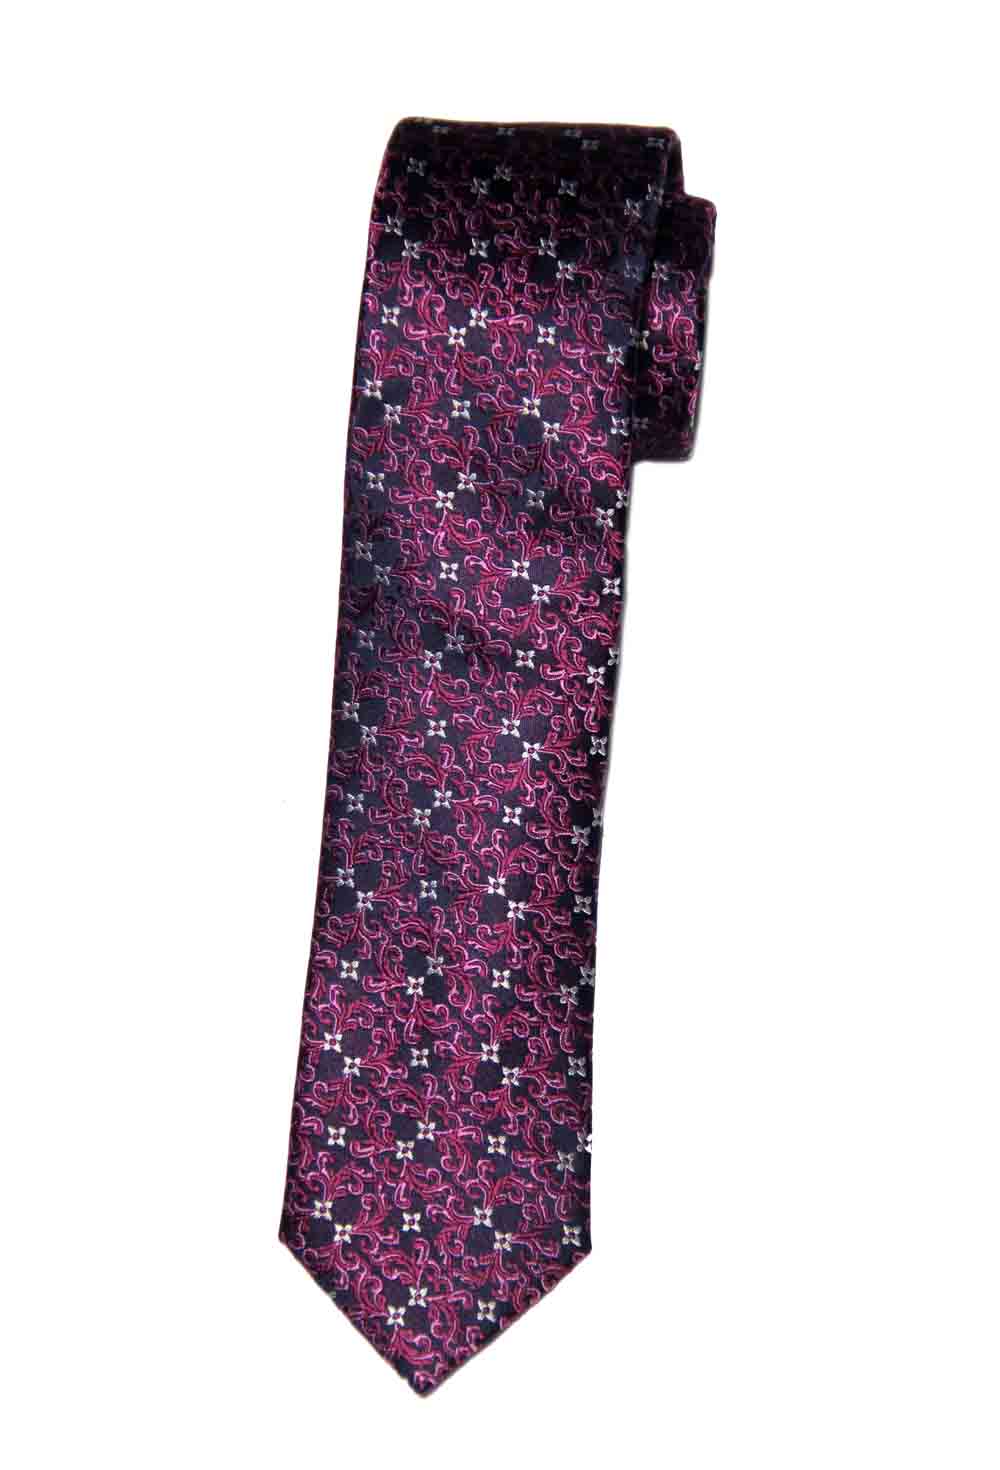 Ted Baker Mulberry Silk Tie Pink Purple Black White Floral Scroll Men's